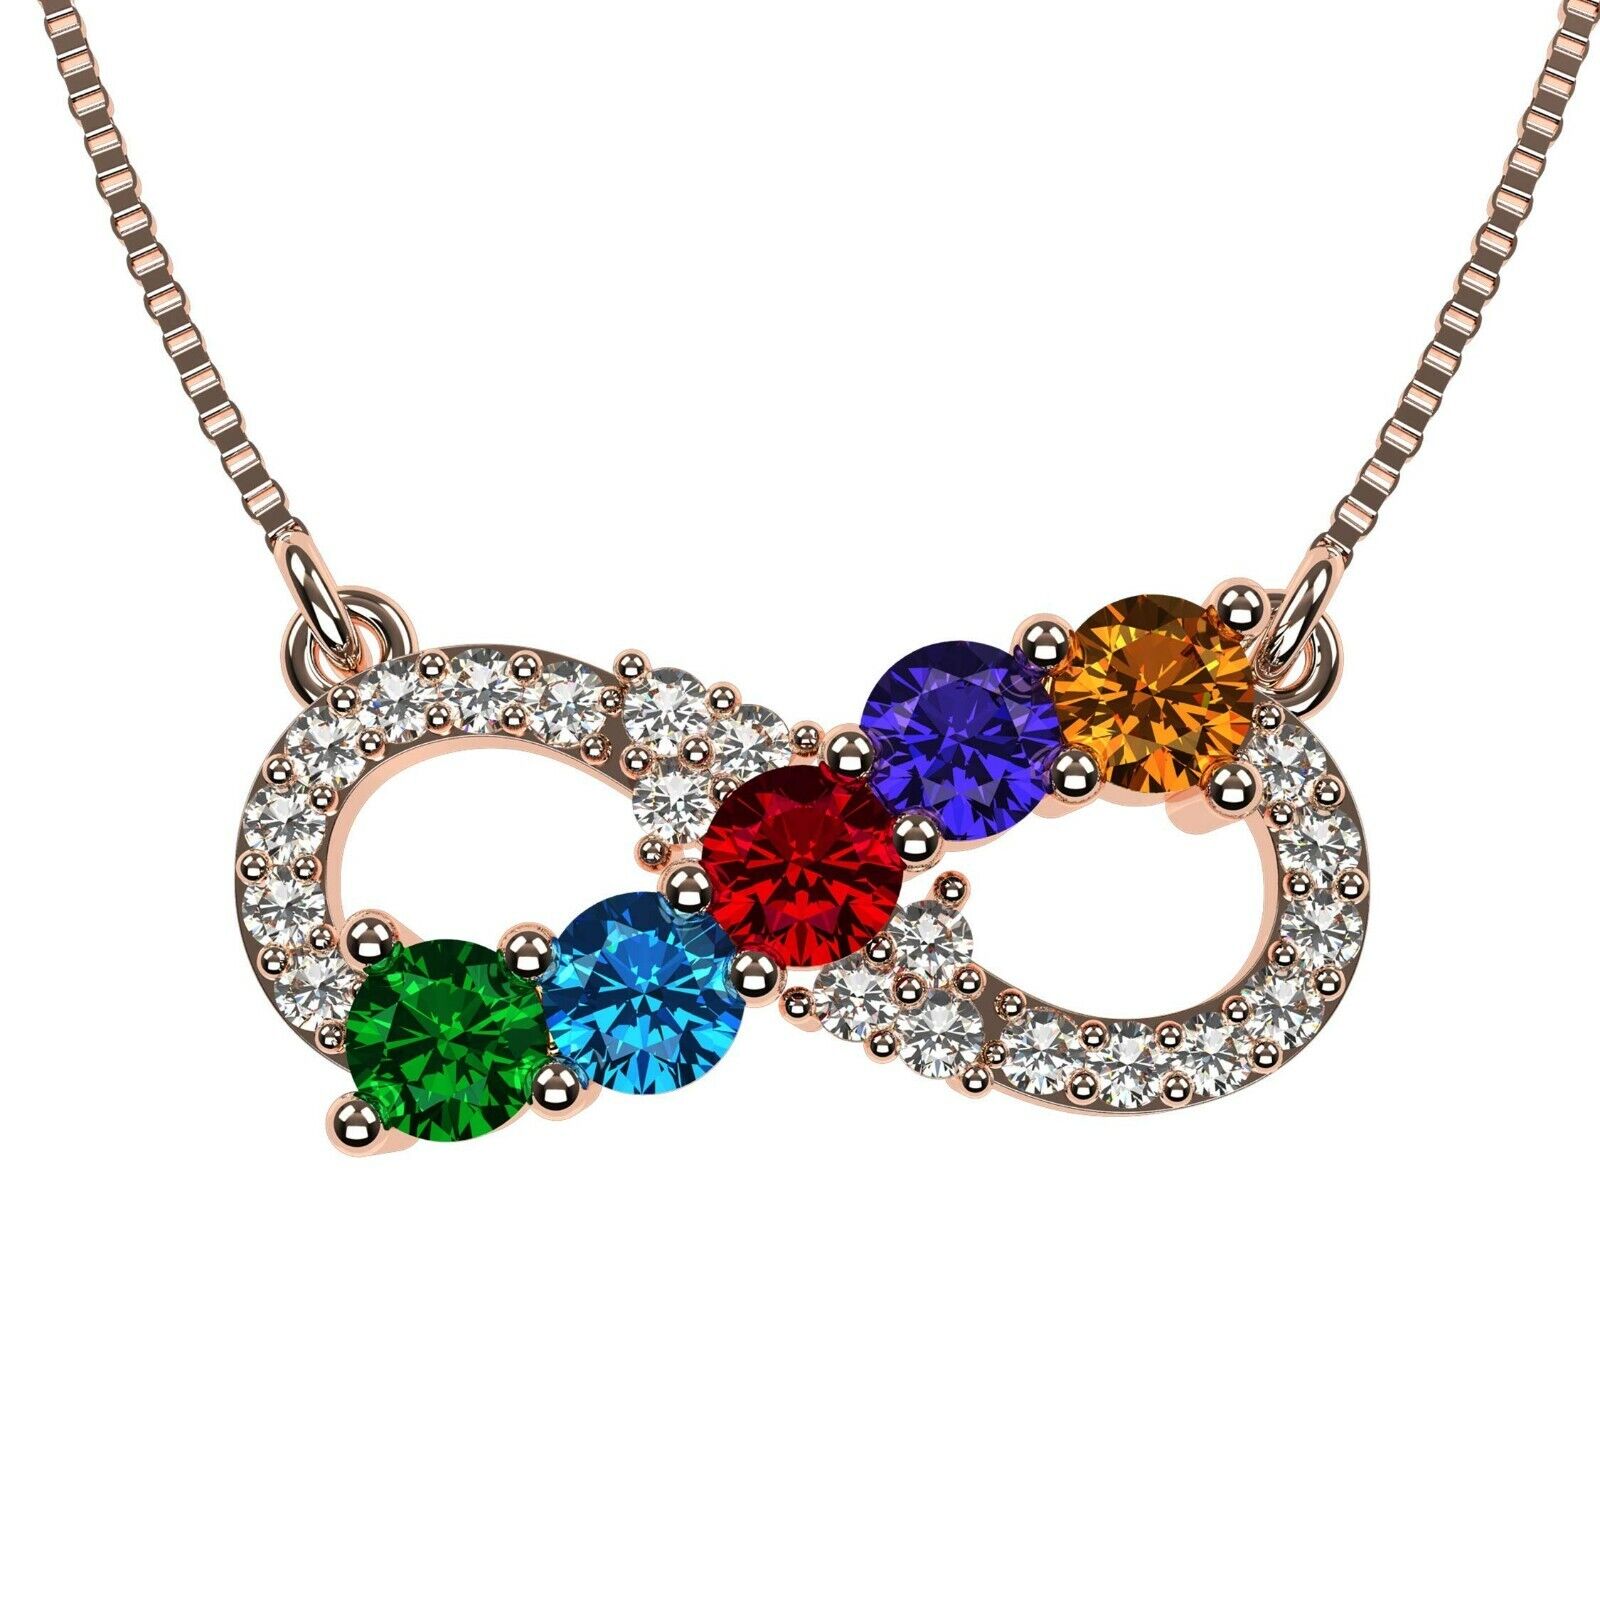 NANA Infinity Mothers Necklace 1-6 Simulated Birthstones 10k or 14k Gold +chain